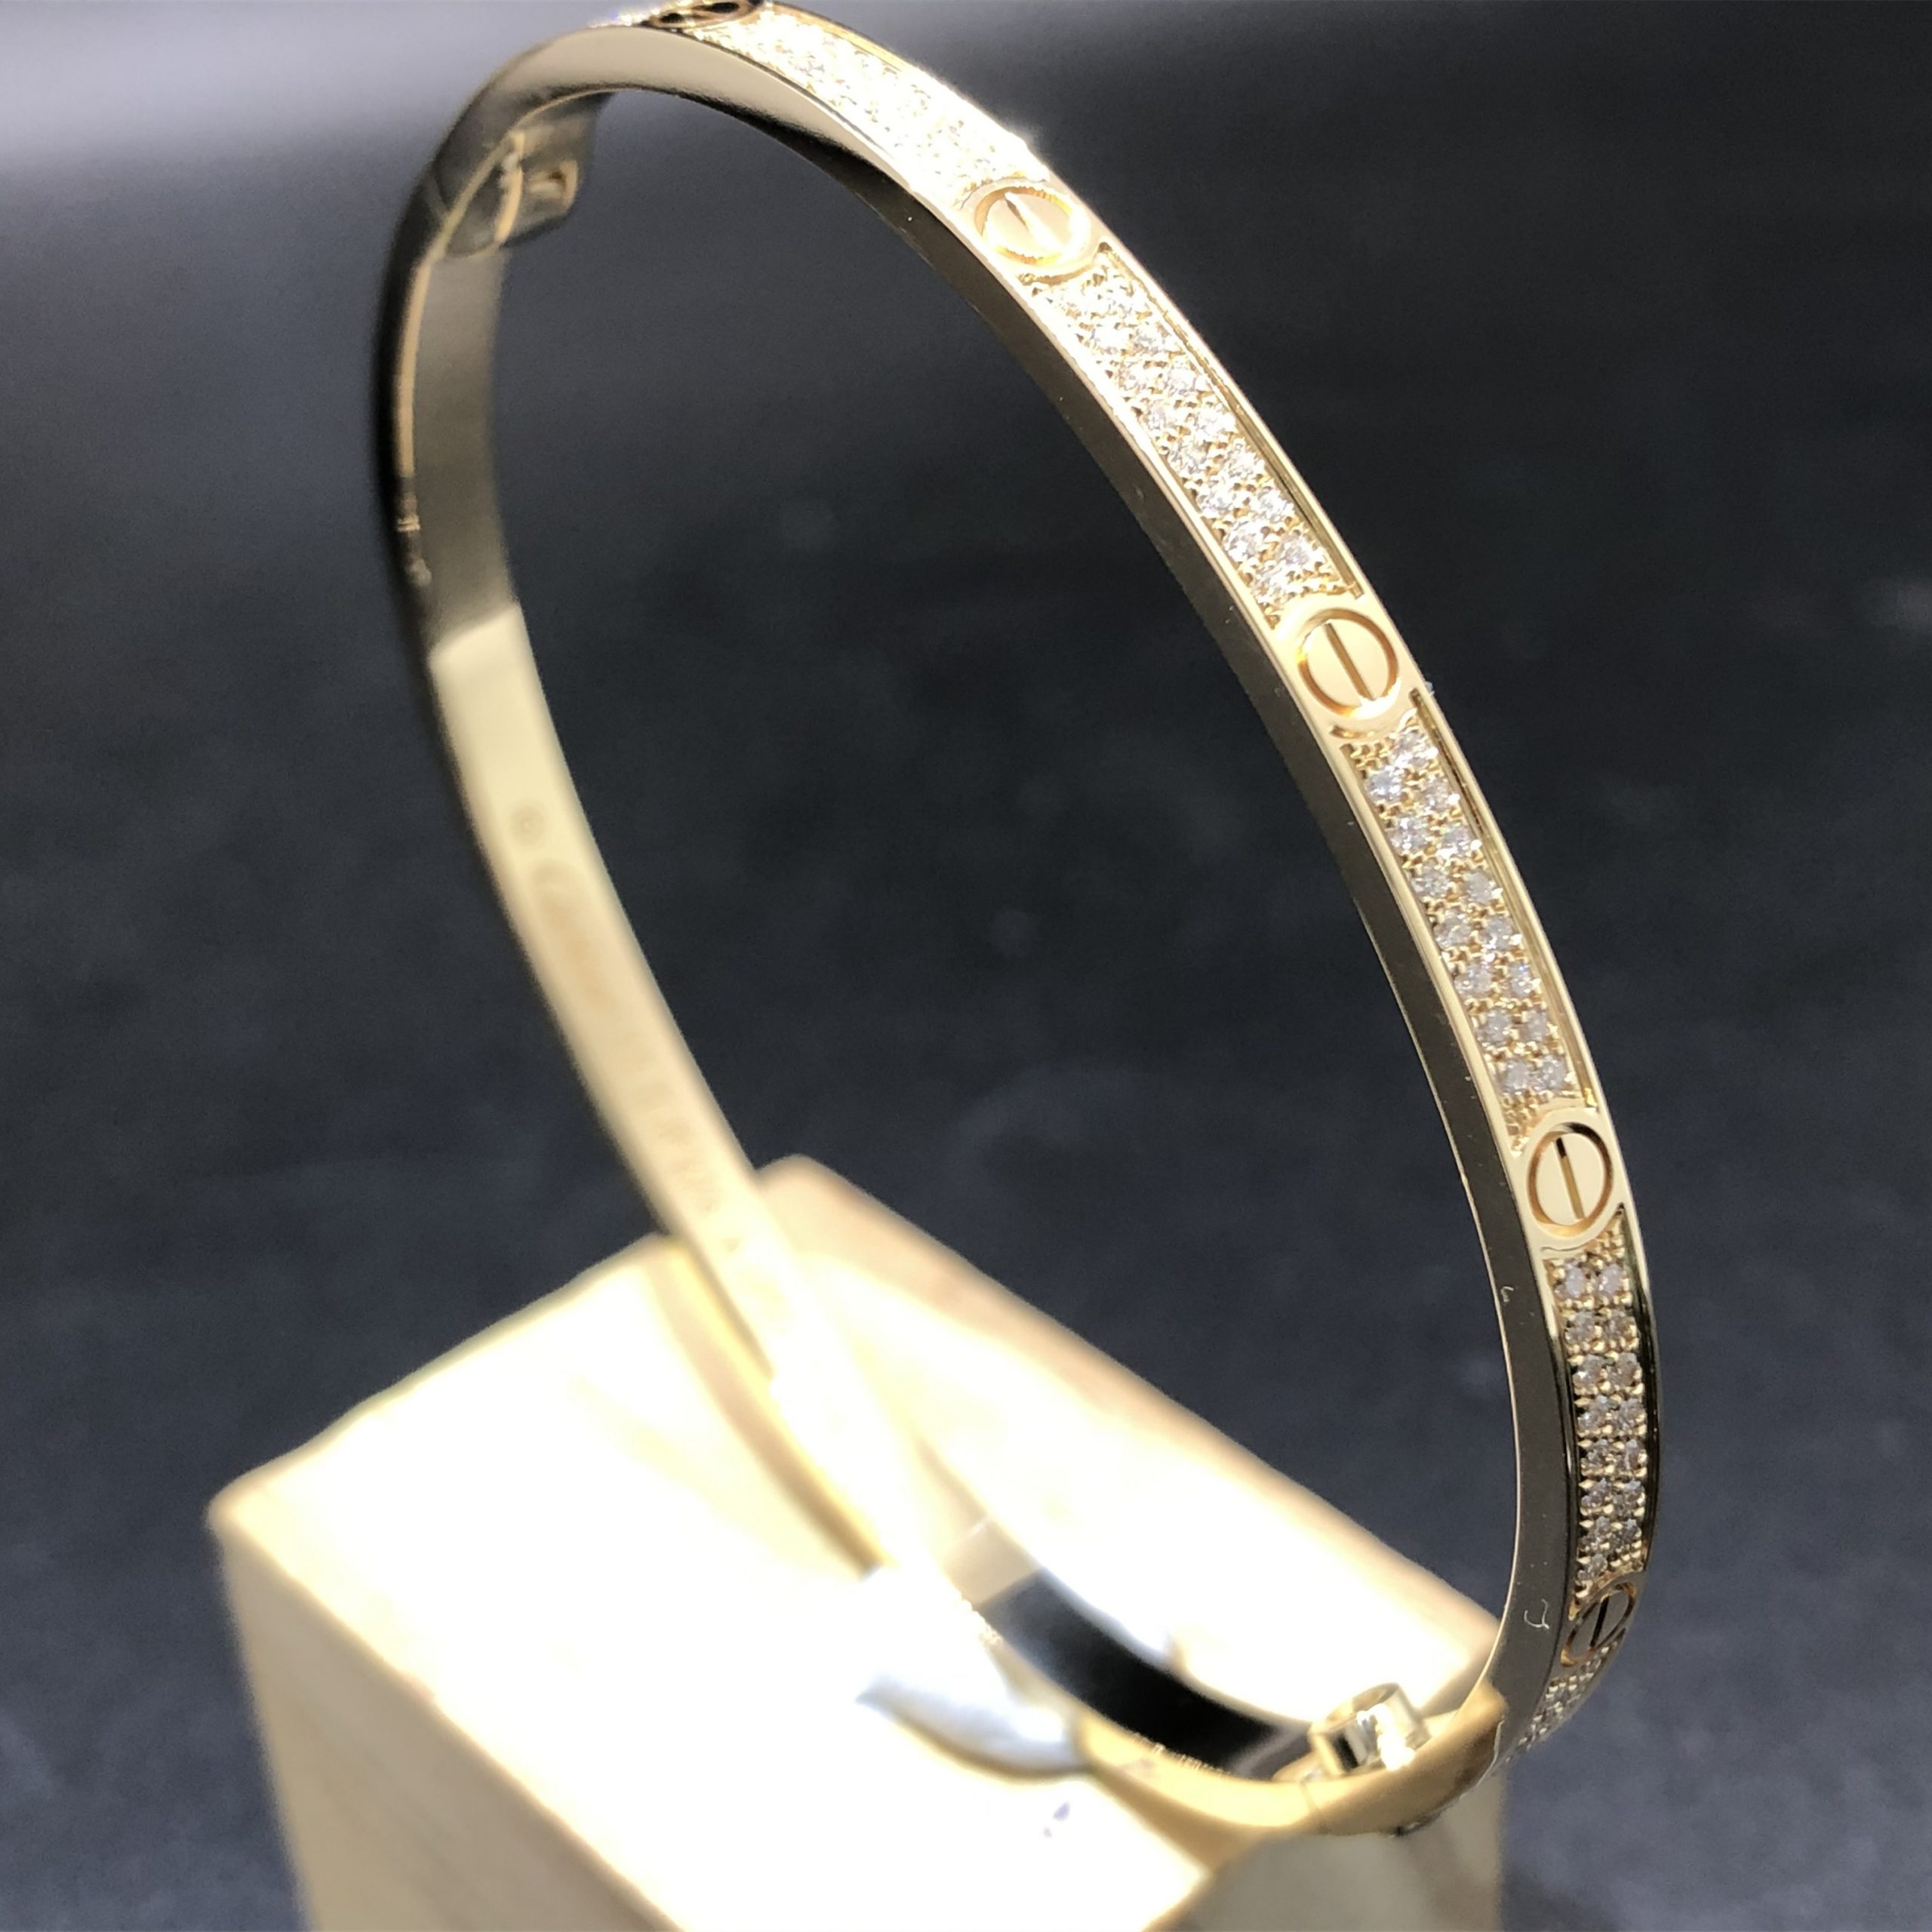 Custom Made Cartier Love Small Model Bracelet in Solid 18K Yellow Gold with Diamonds-paved